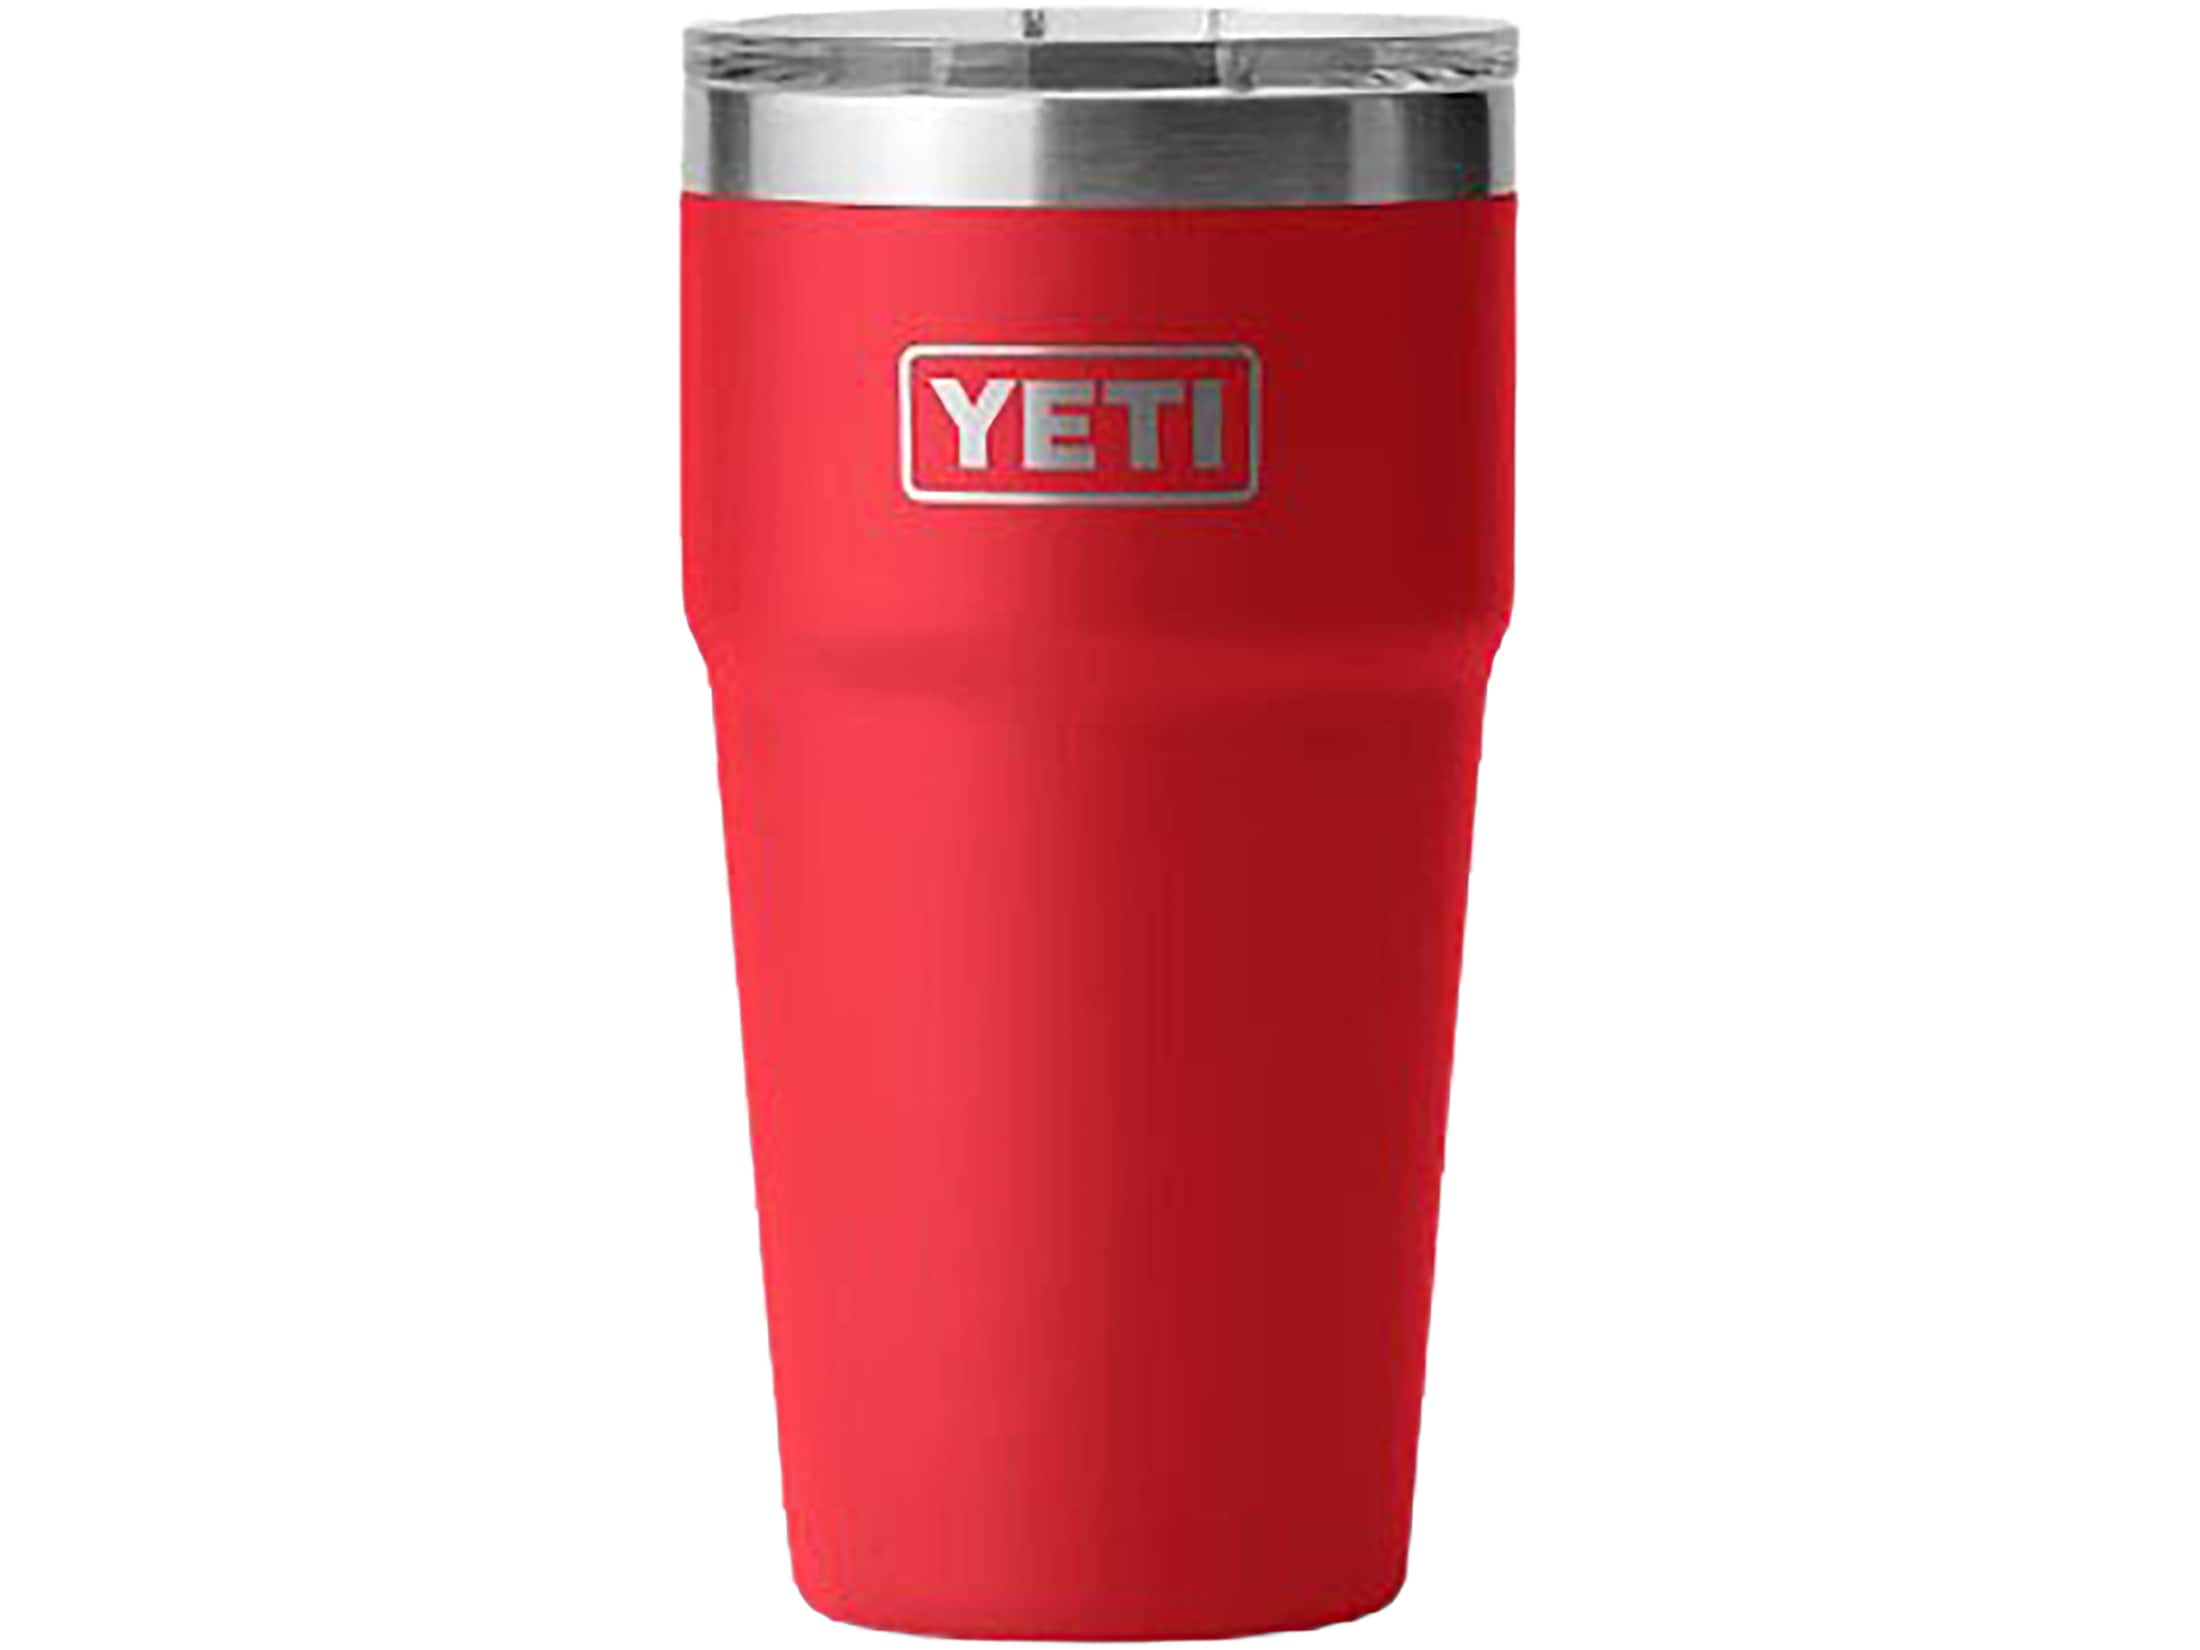 1-Yeti Magnet MagSlider with smooth bottom 13 colors to choose